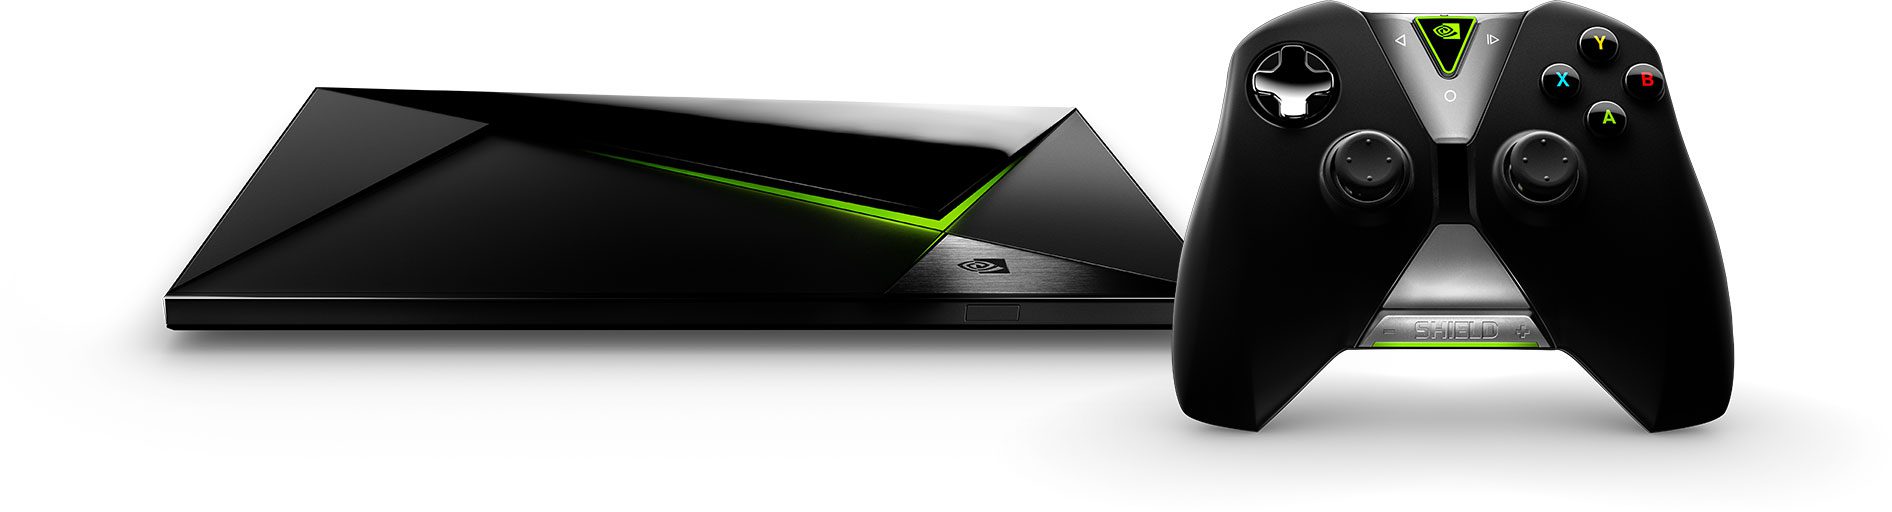 New Nvidia Shield Model Poised to Revolutionize Consoles and Streaming